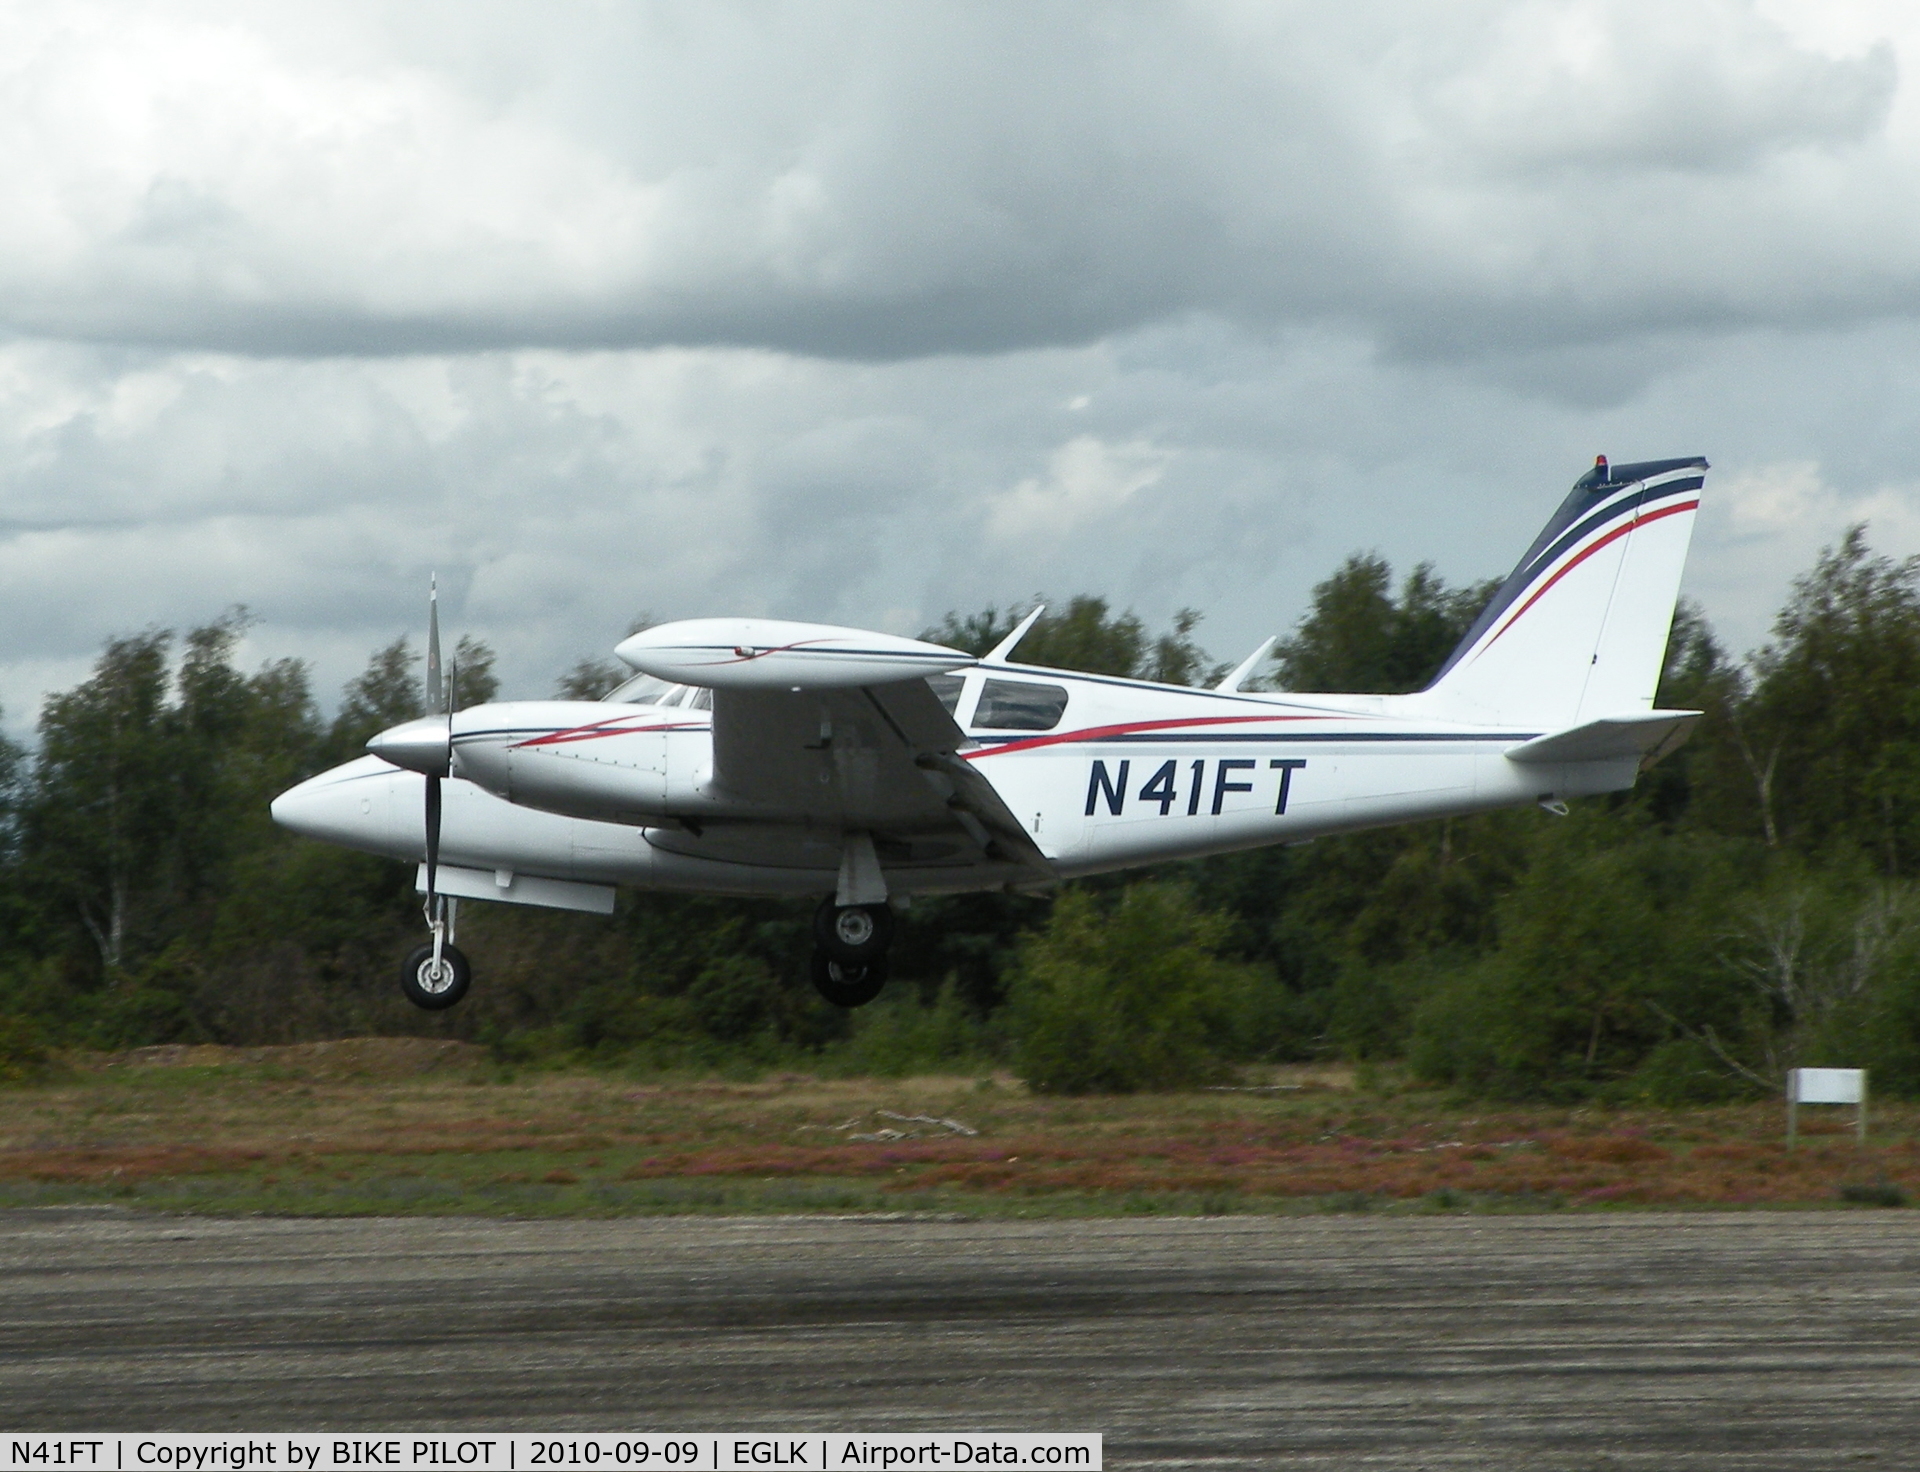 N41FT, 1970 Piper PA-39 Twin Comanche C/N 39-59, fainals for rwy 25.